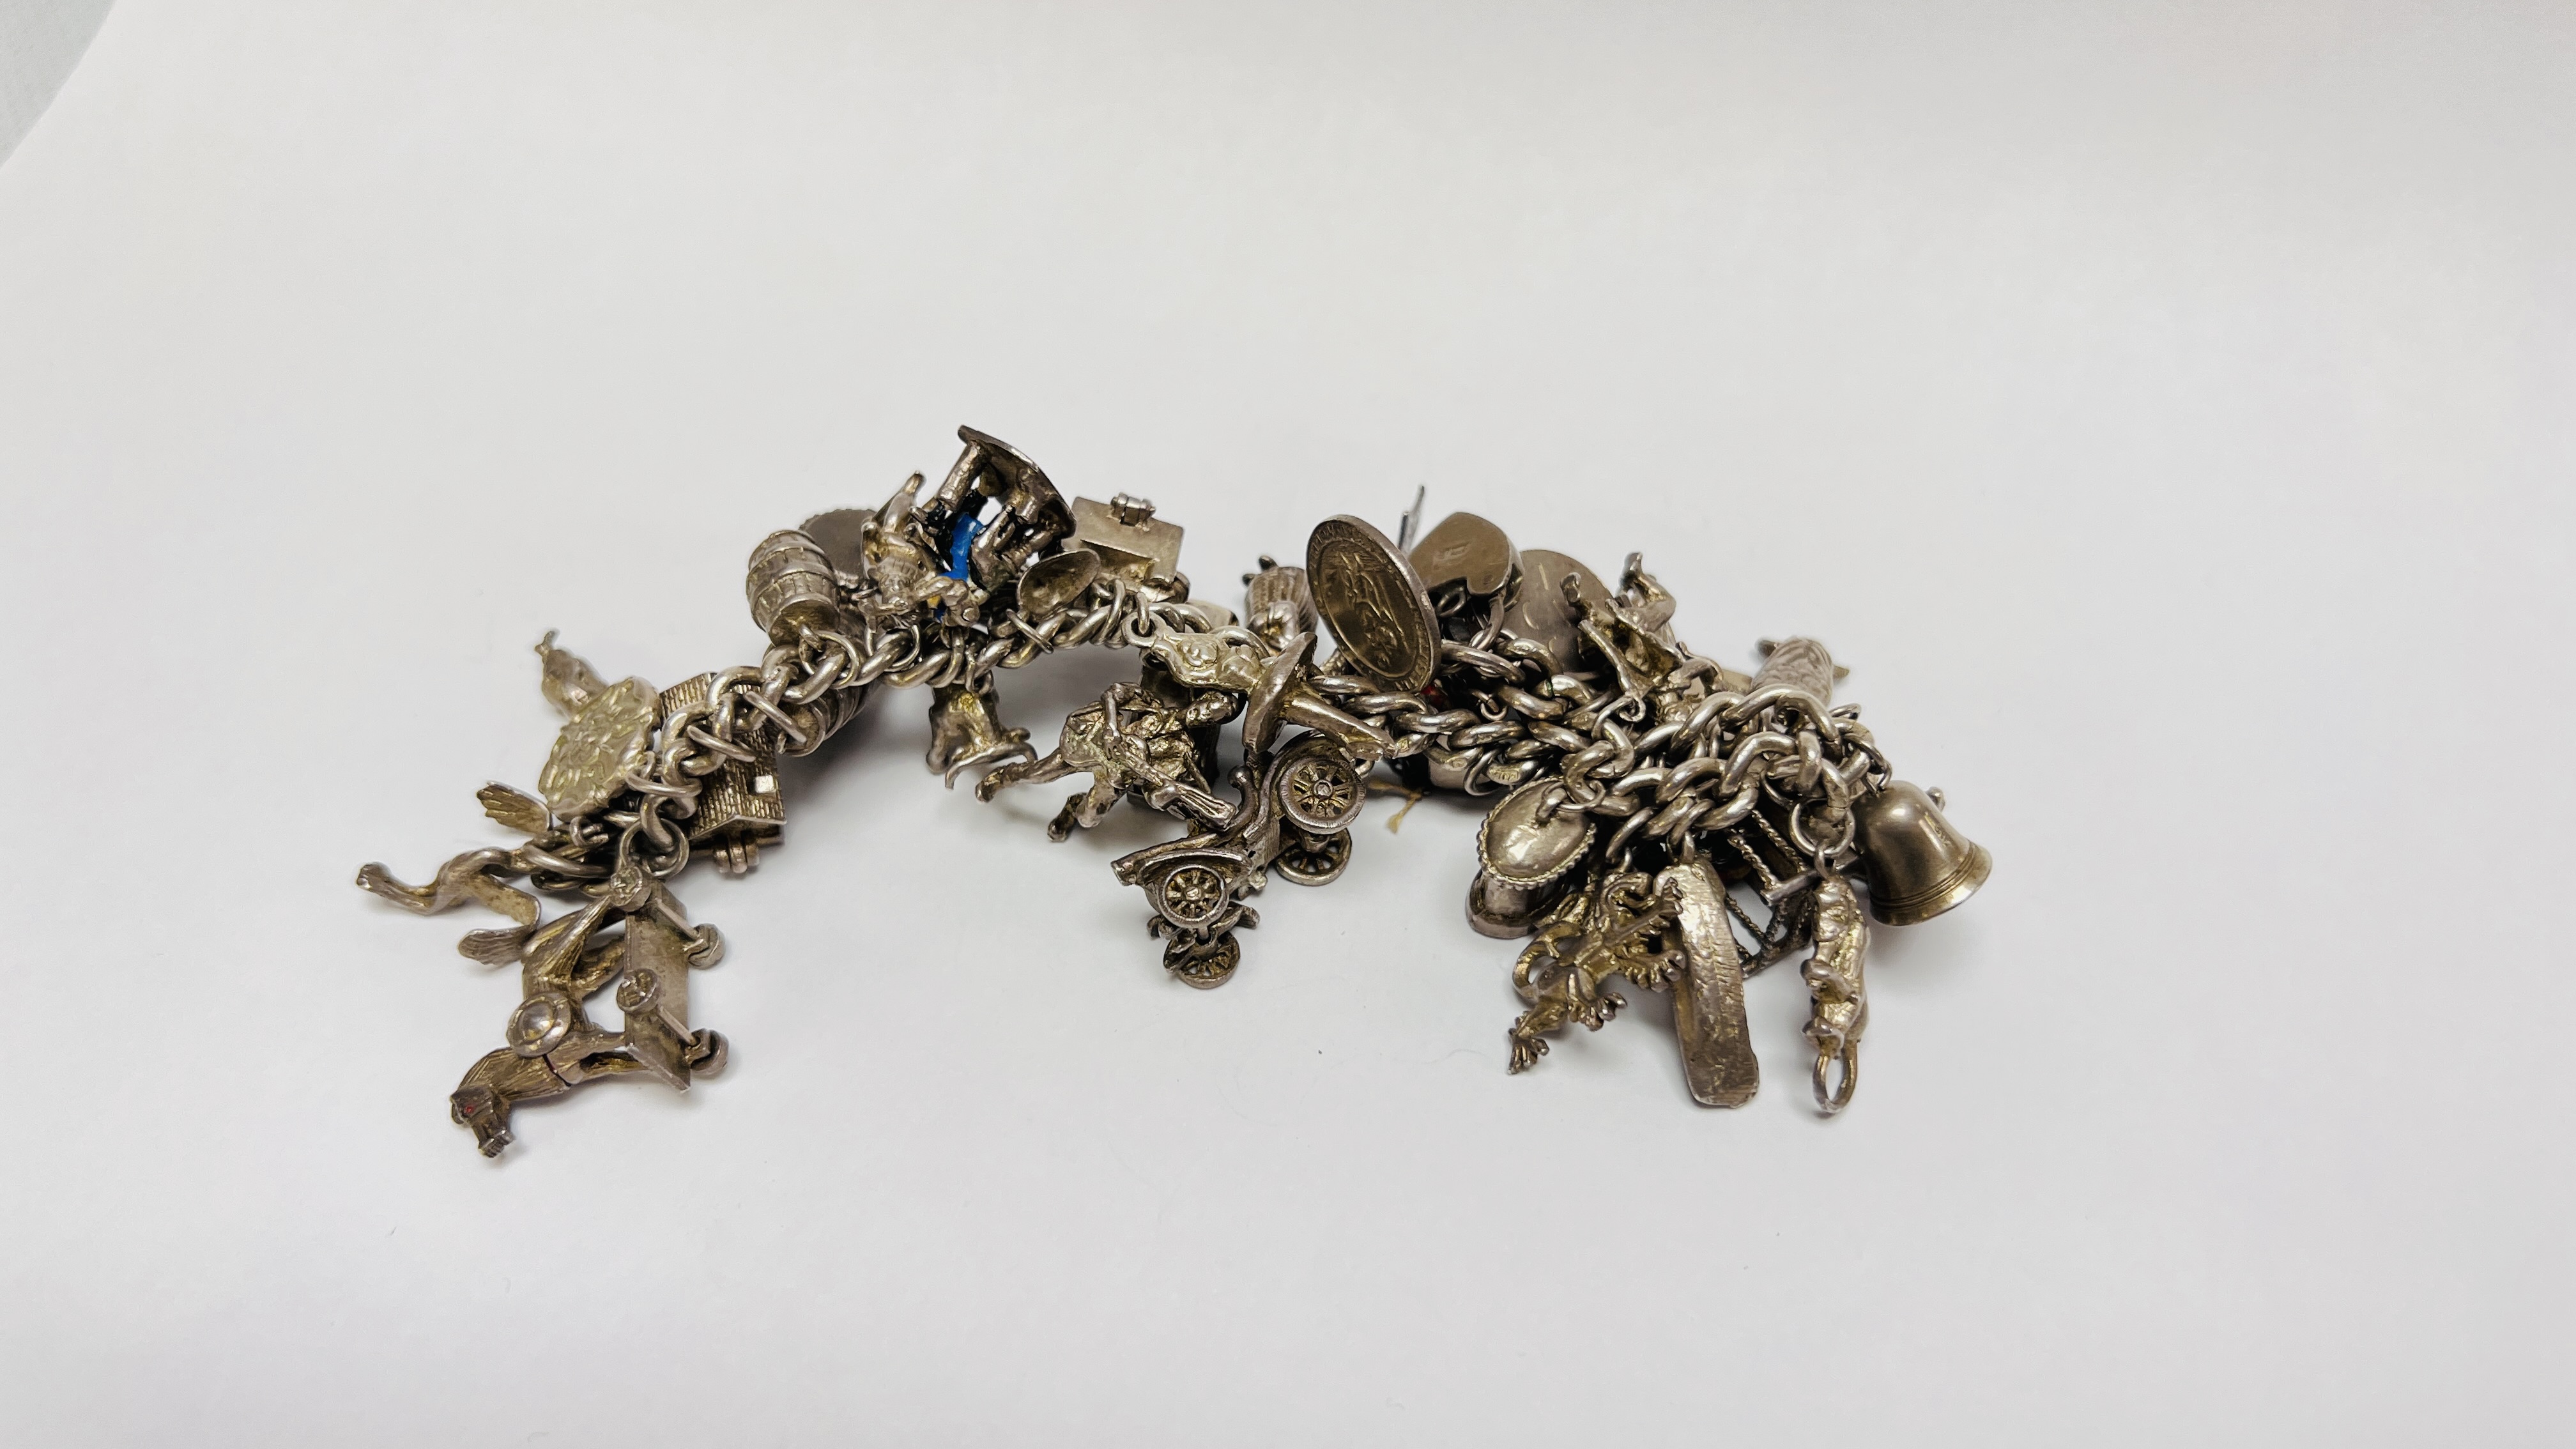 VINTAGE SILVER CHARM BRACELET PADLOCK CLASP WITH APPROX 35 SILVER AND WHITE METAL CHARMS - Image 5 of 8